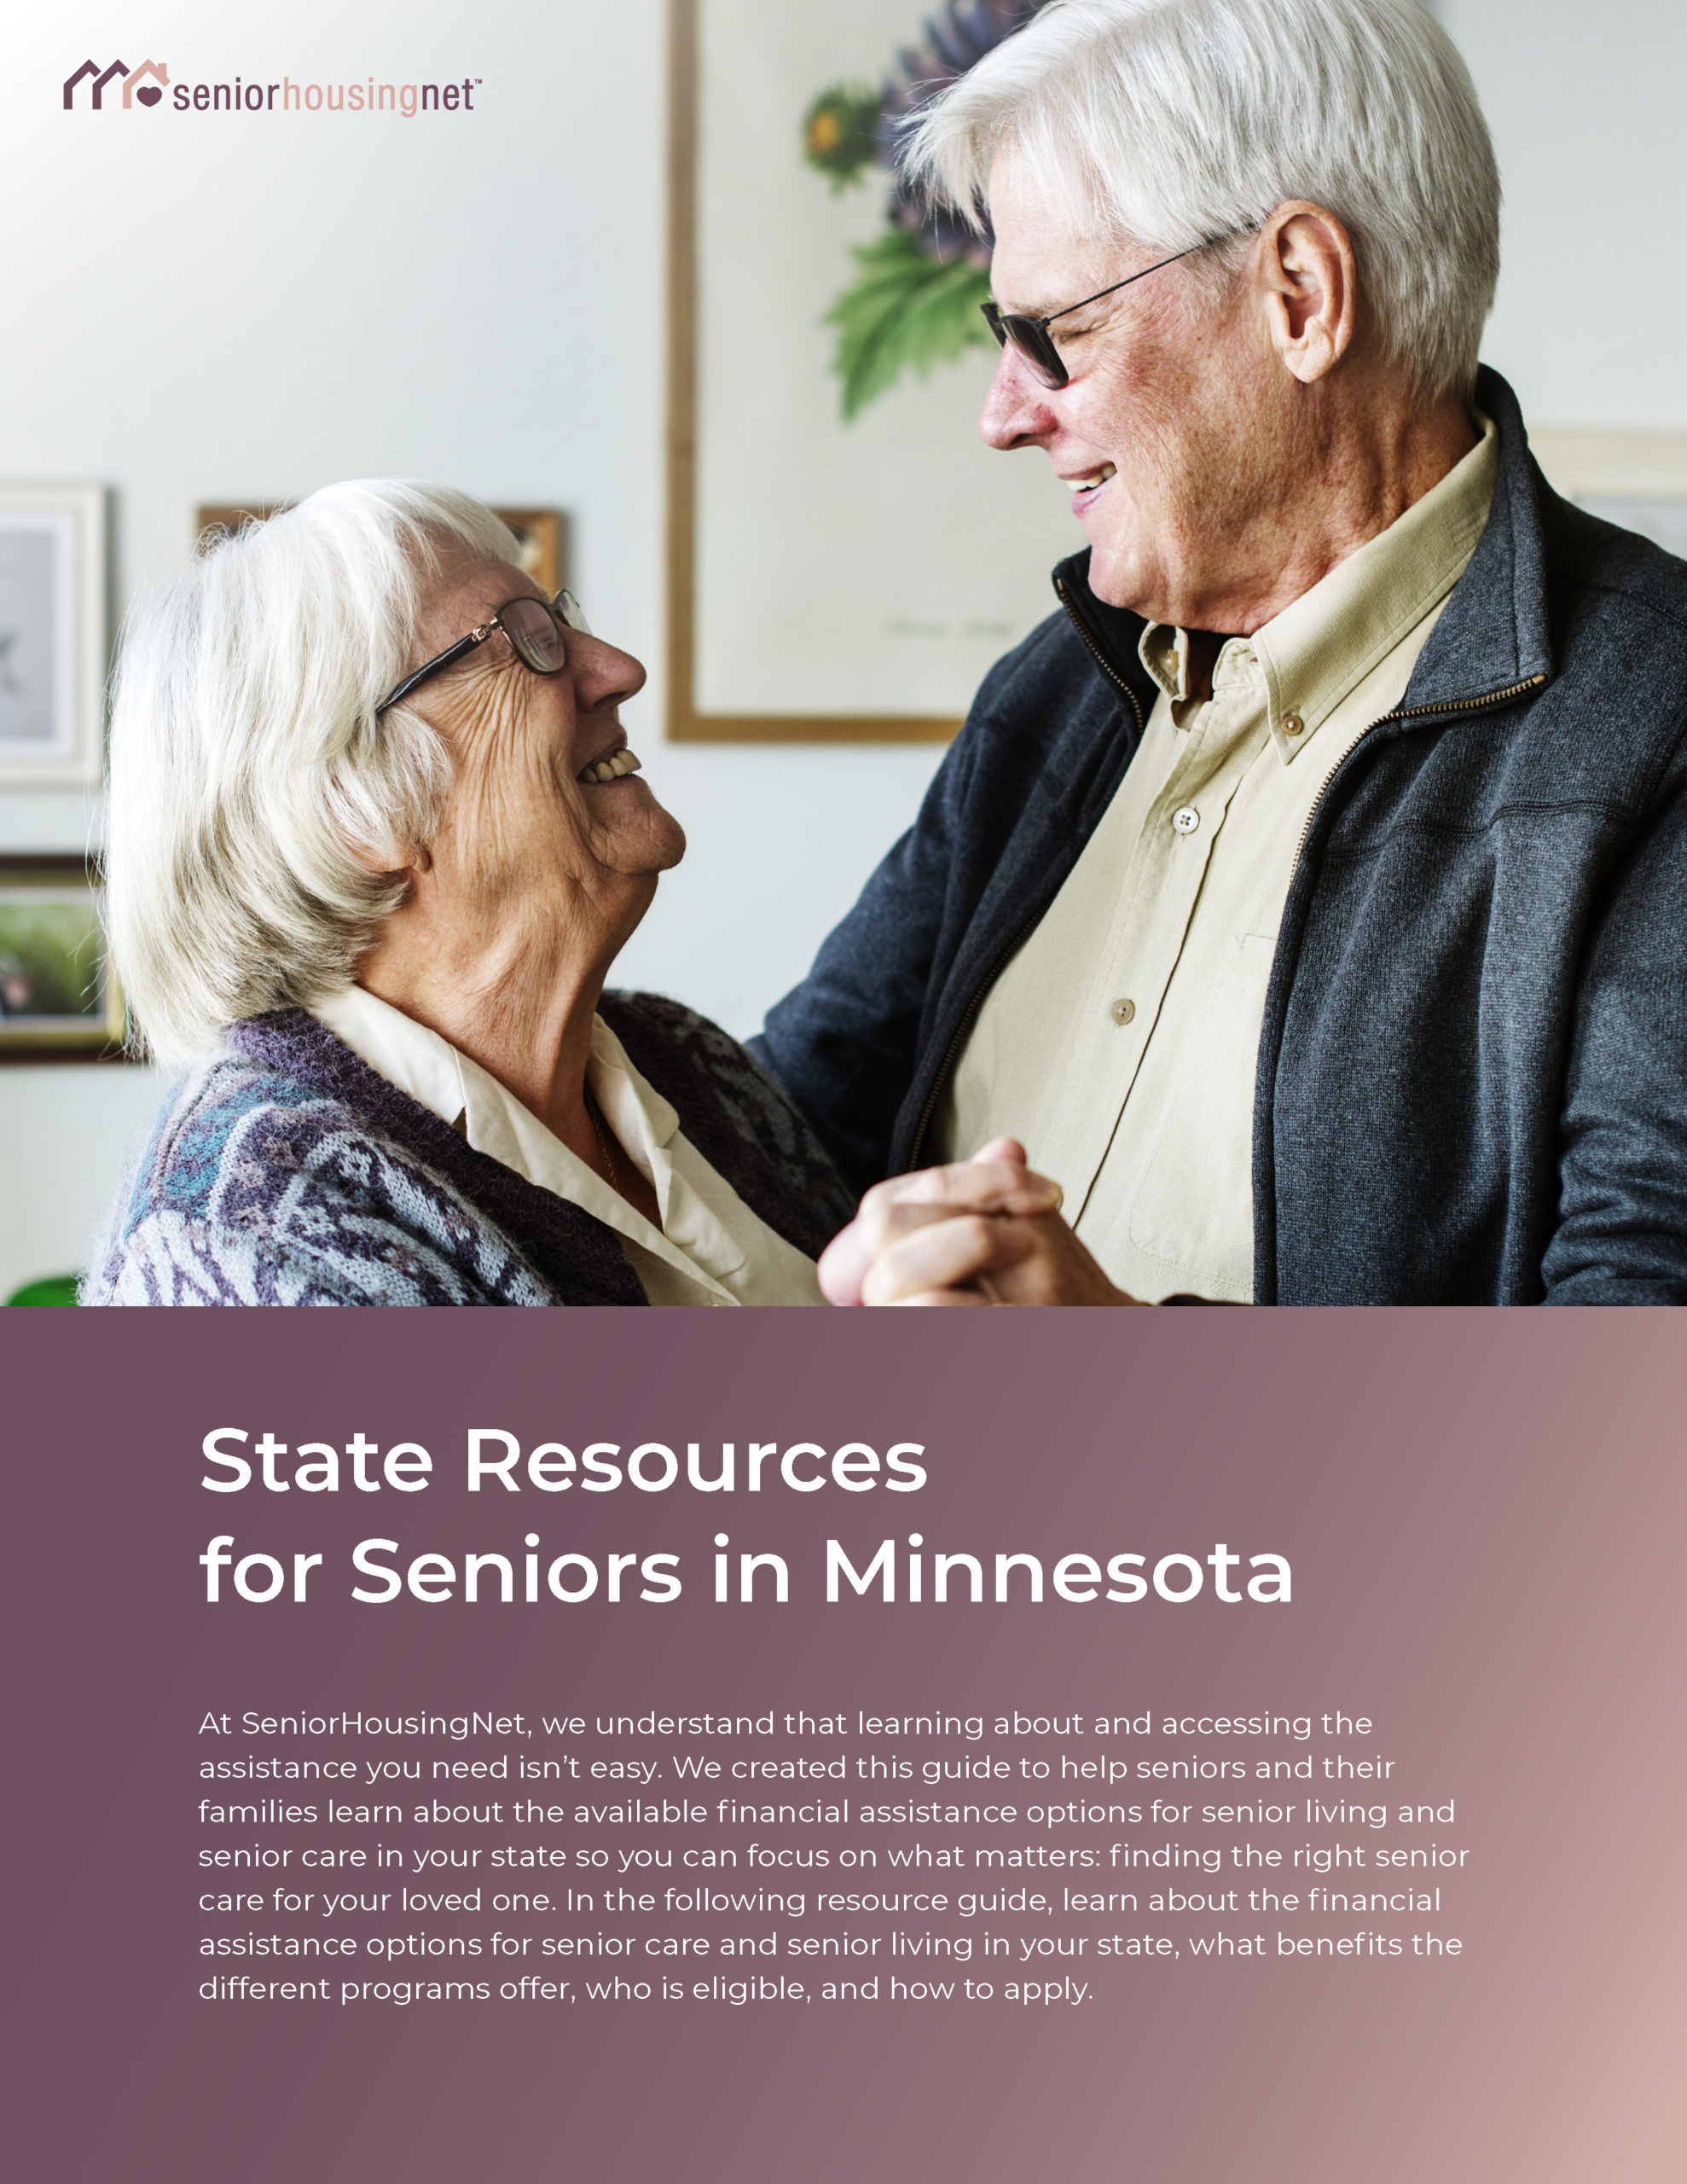 State Resources for Seniors in Minnesota